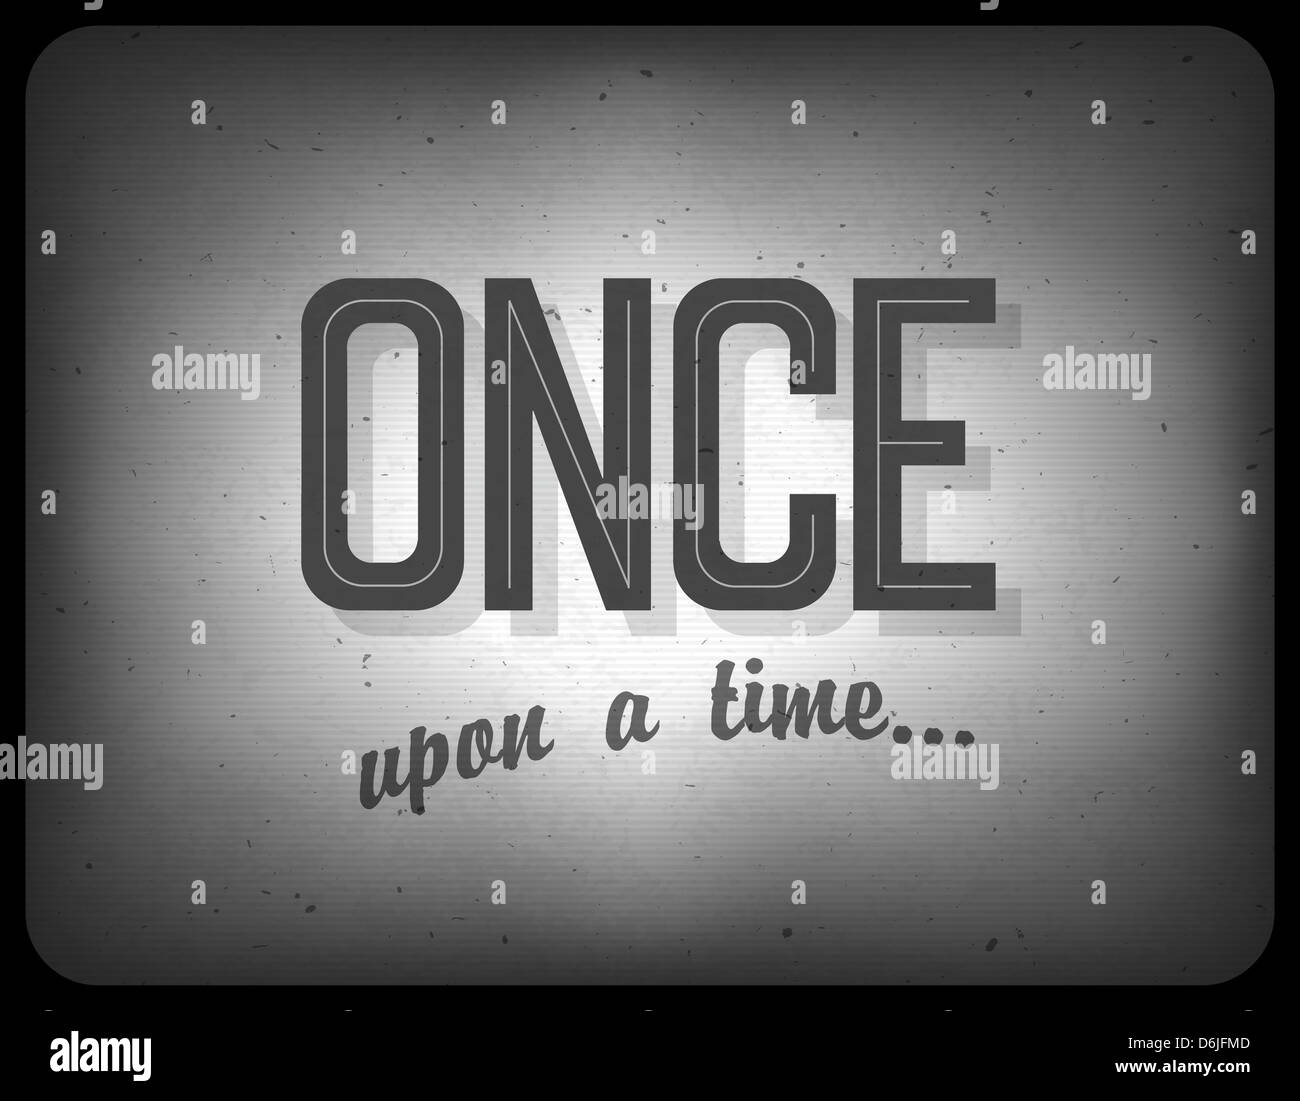 Old cinema phrase (once upon a time), Stock Photo